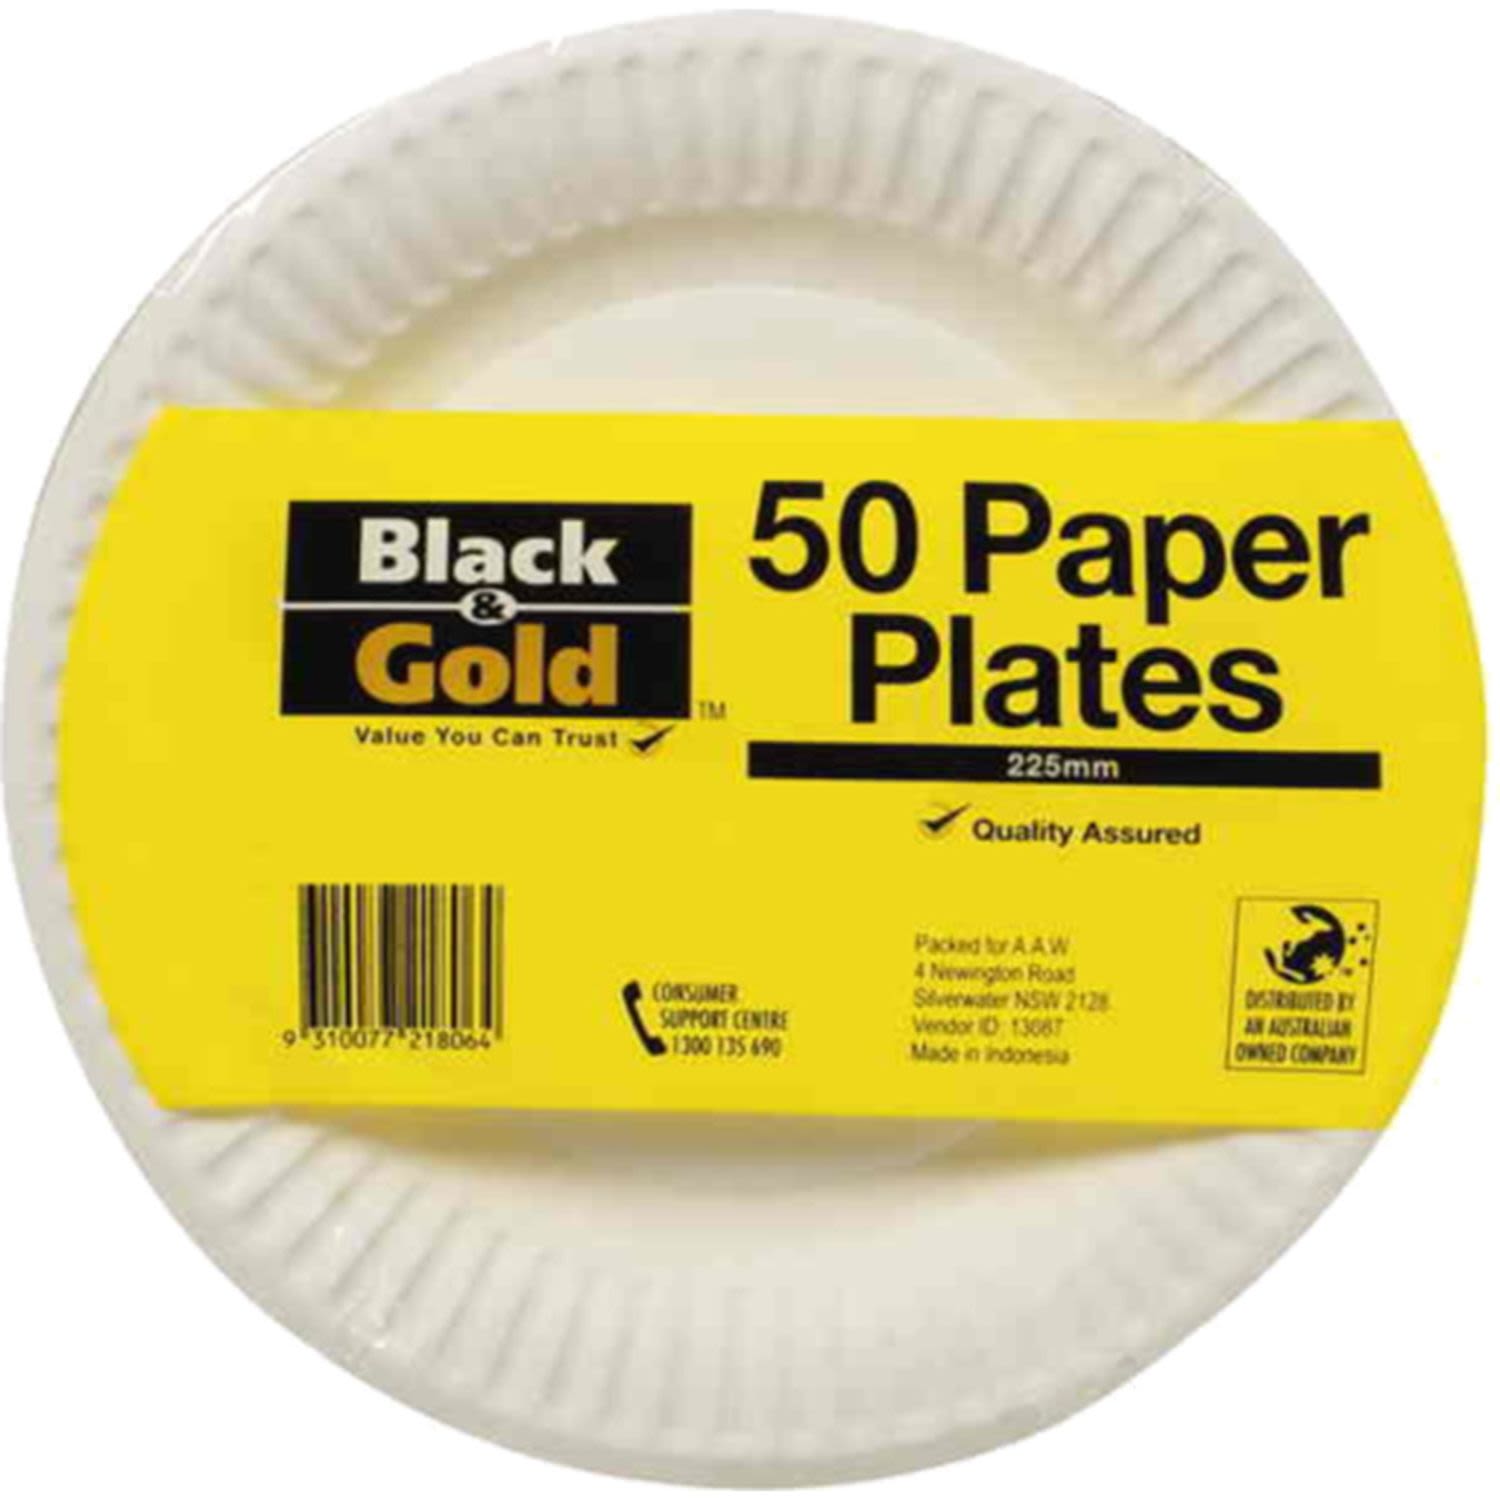 Black & Gold Paper Plate, 50 Each